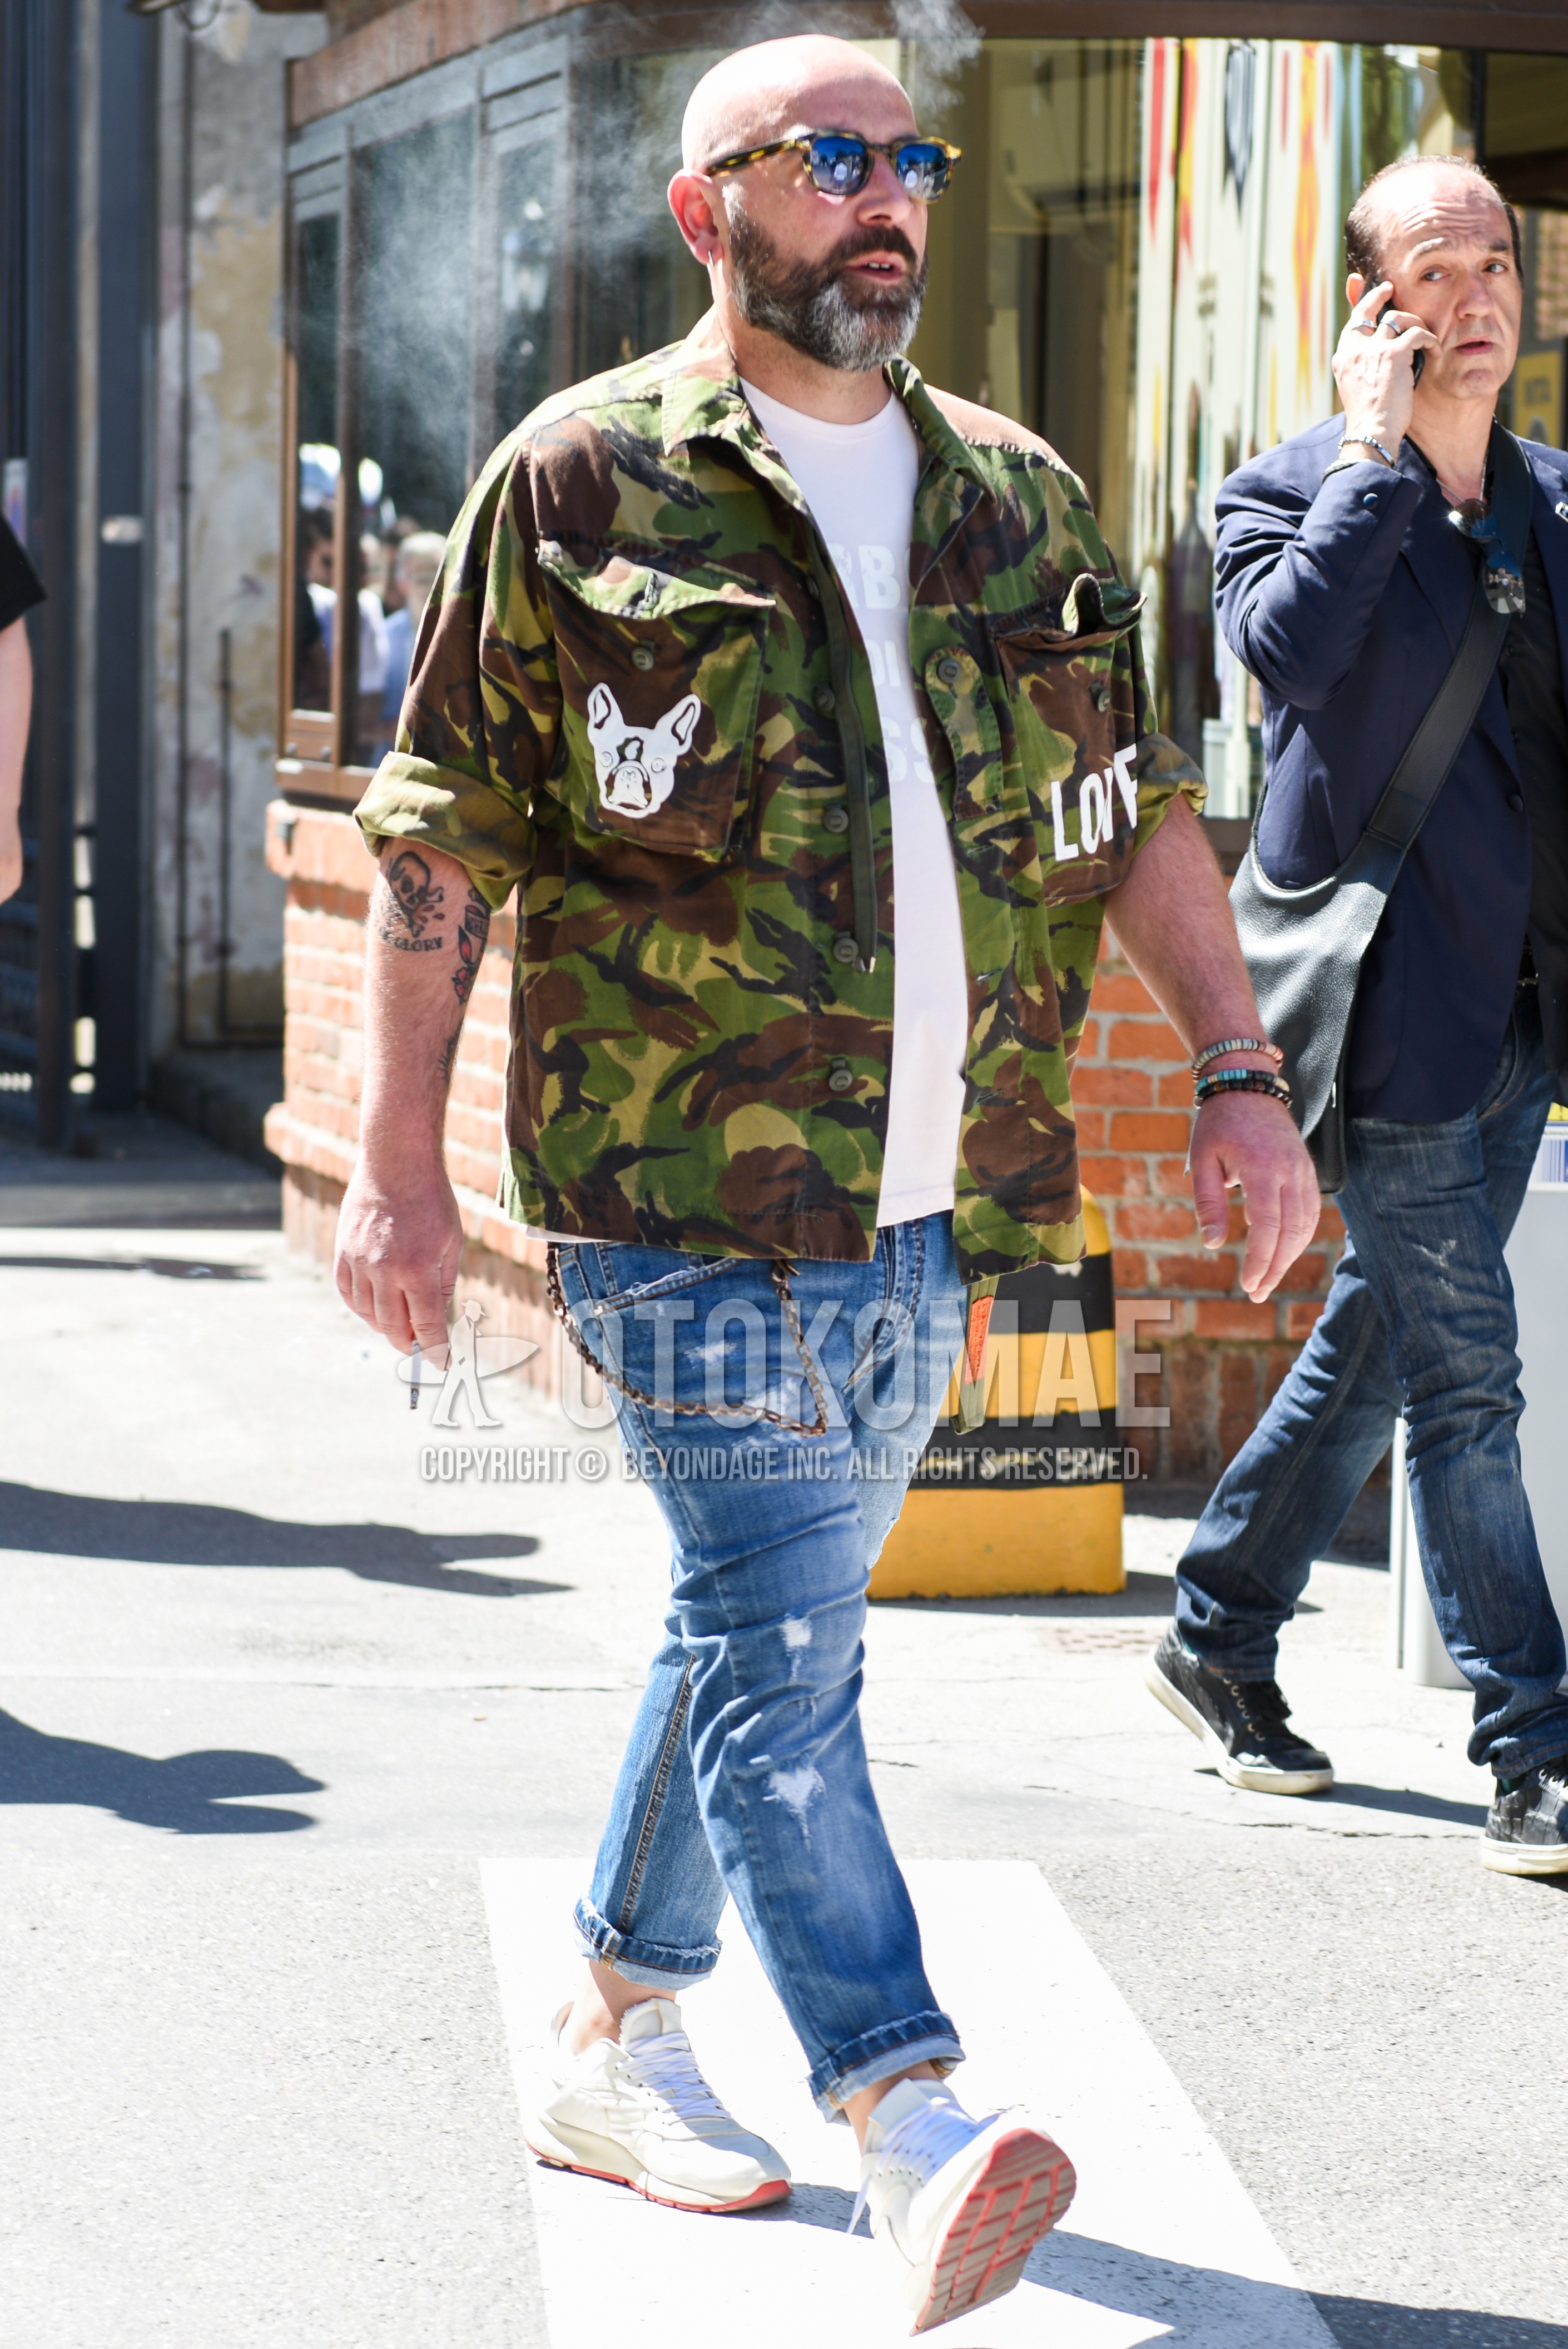 Men's spring autumn outfit with beige tortoiseshell sunglasses, olive green brown beige camouflage shirt jacket, white graphic t-shirt, blue plain damaged jeans, beige low-cut sneakers.